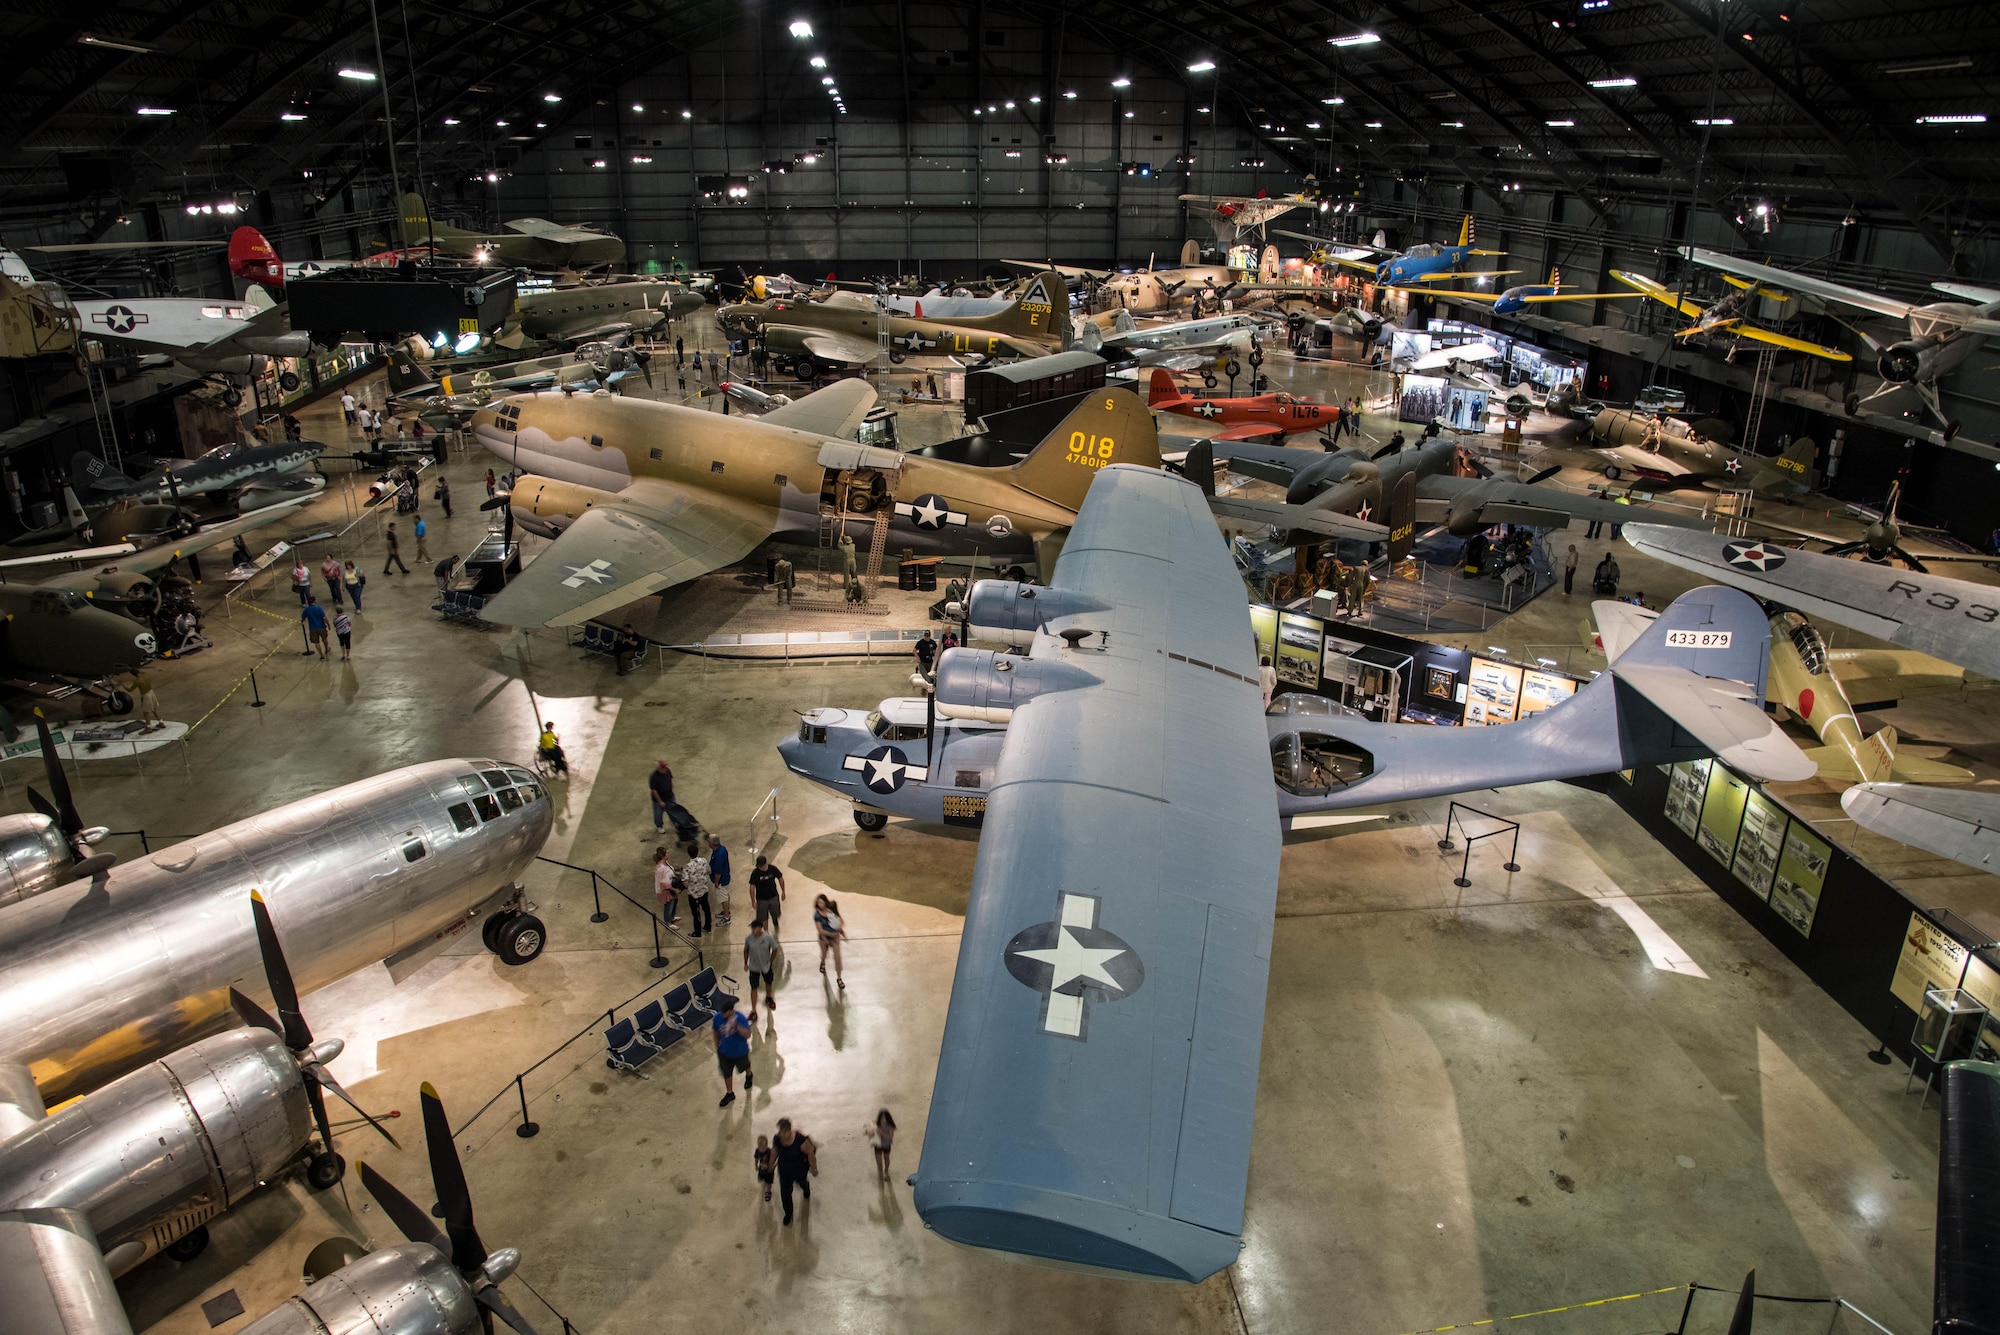 A general view of the WWII Gallery at the National Museum of the United States Air Force. (U.S. Air Force photo by Ken LaRock)